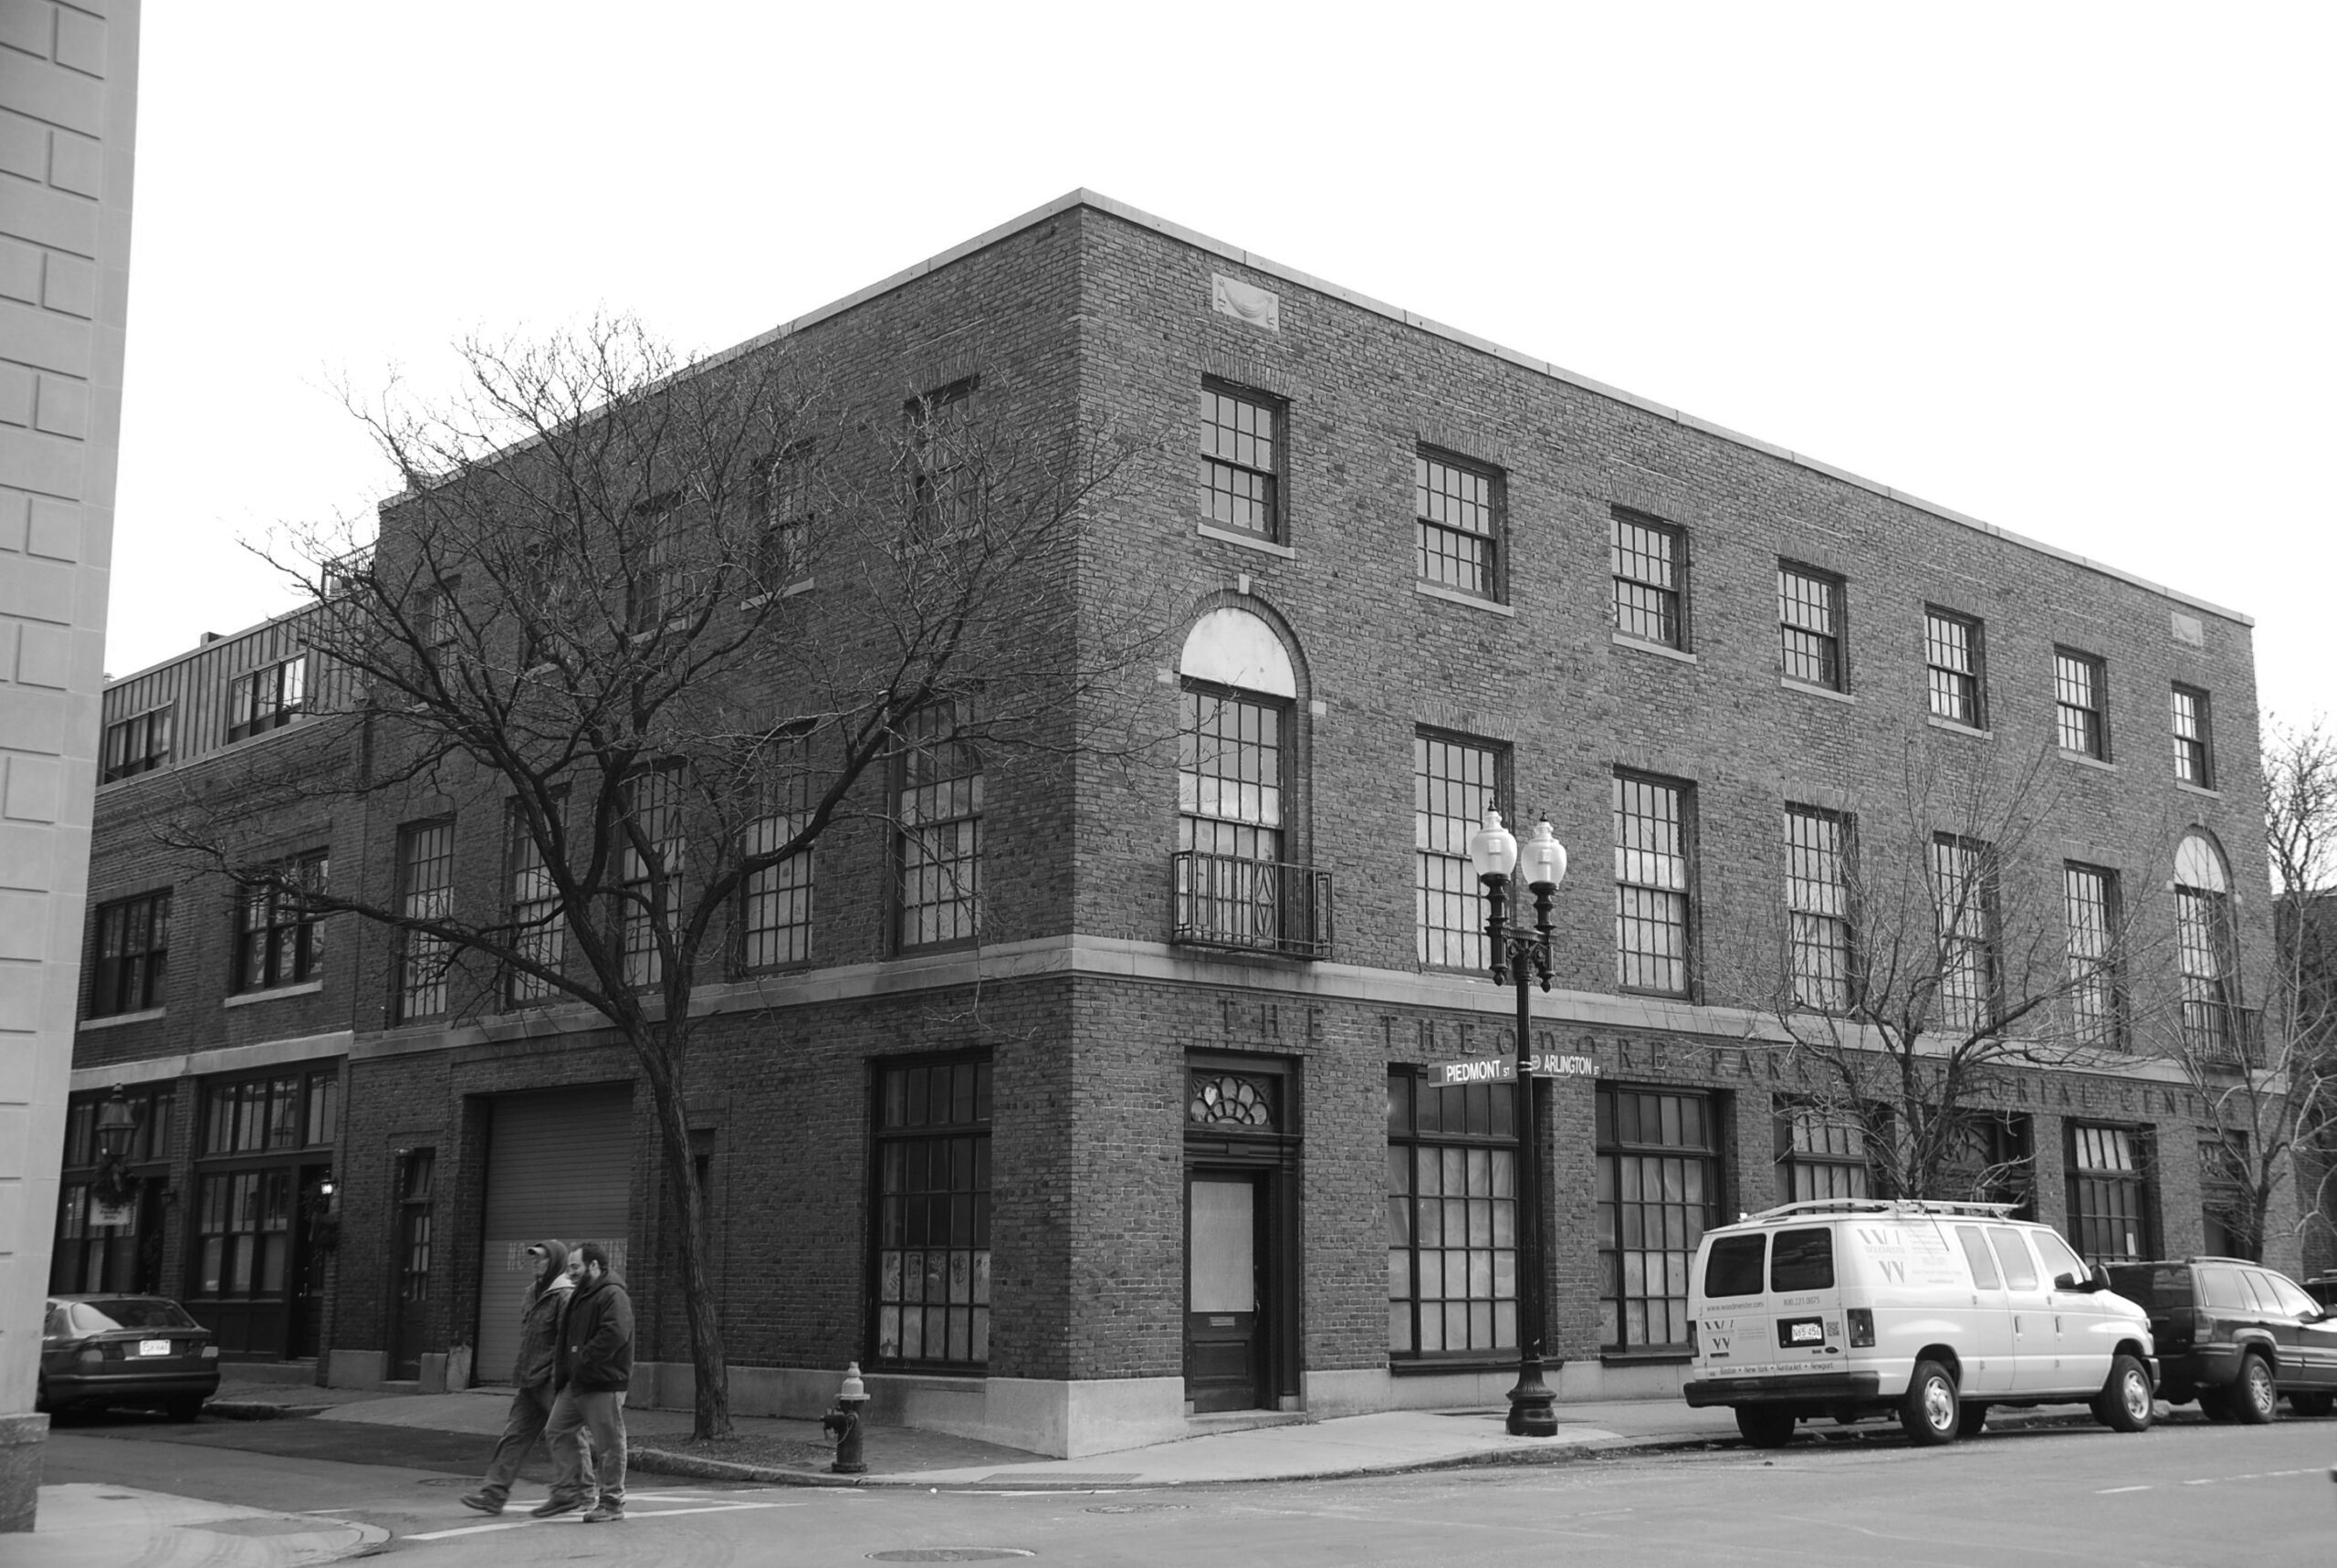 Existing structure at 110 Arlington, built in 1931